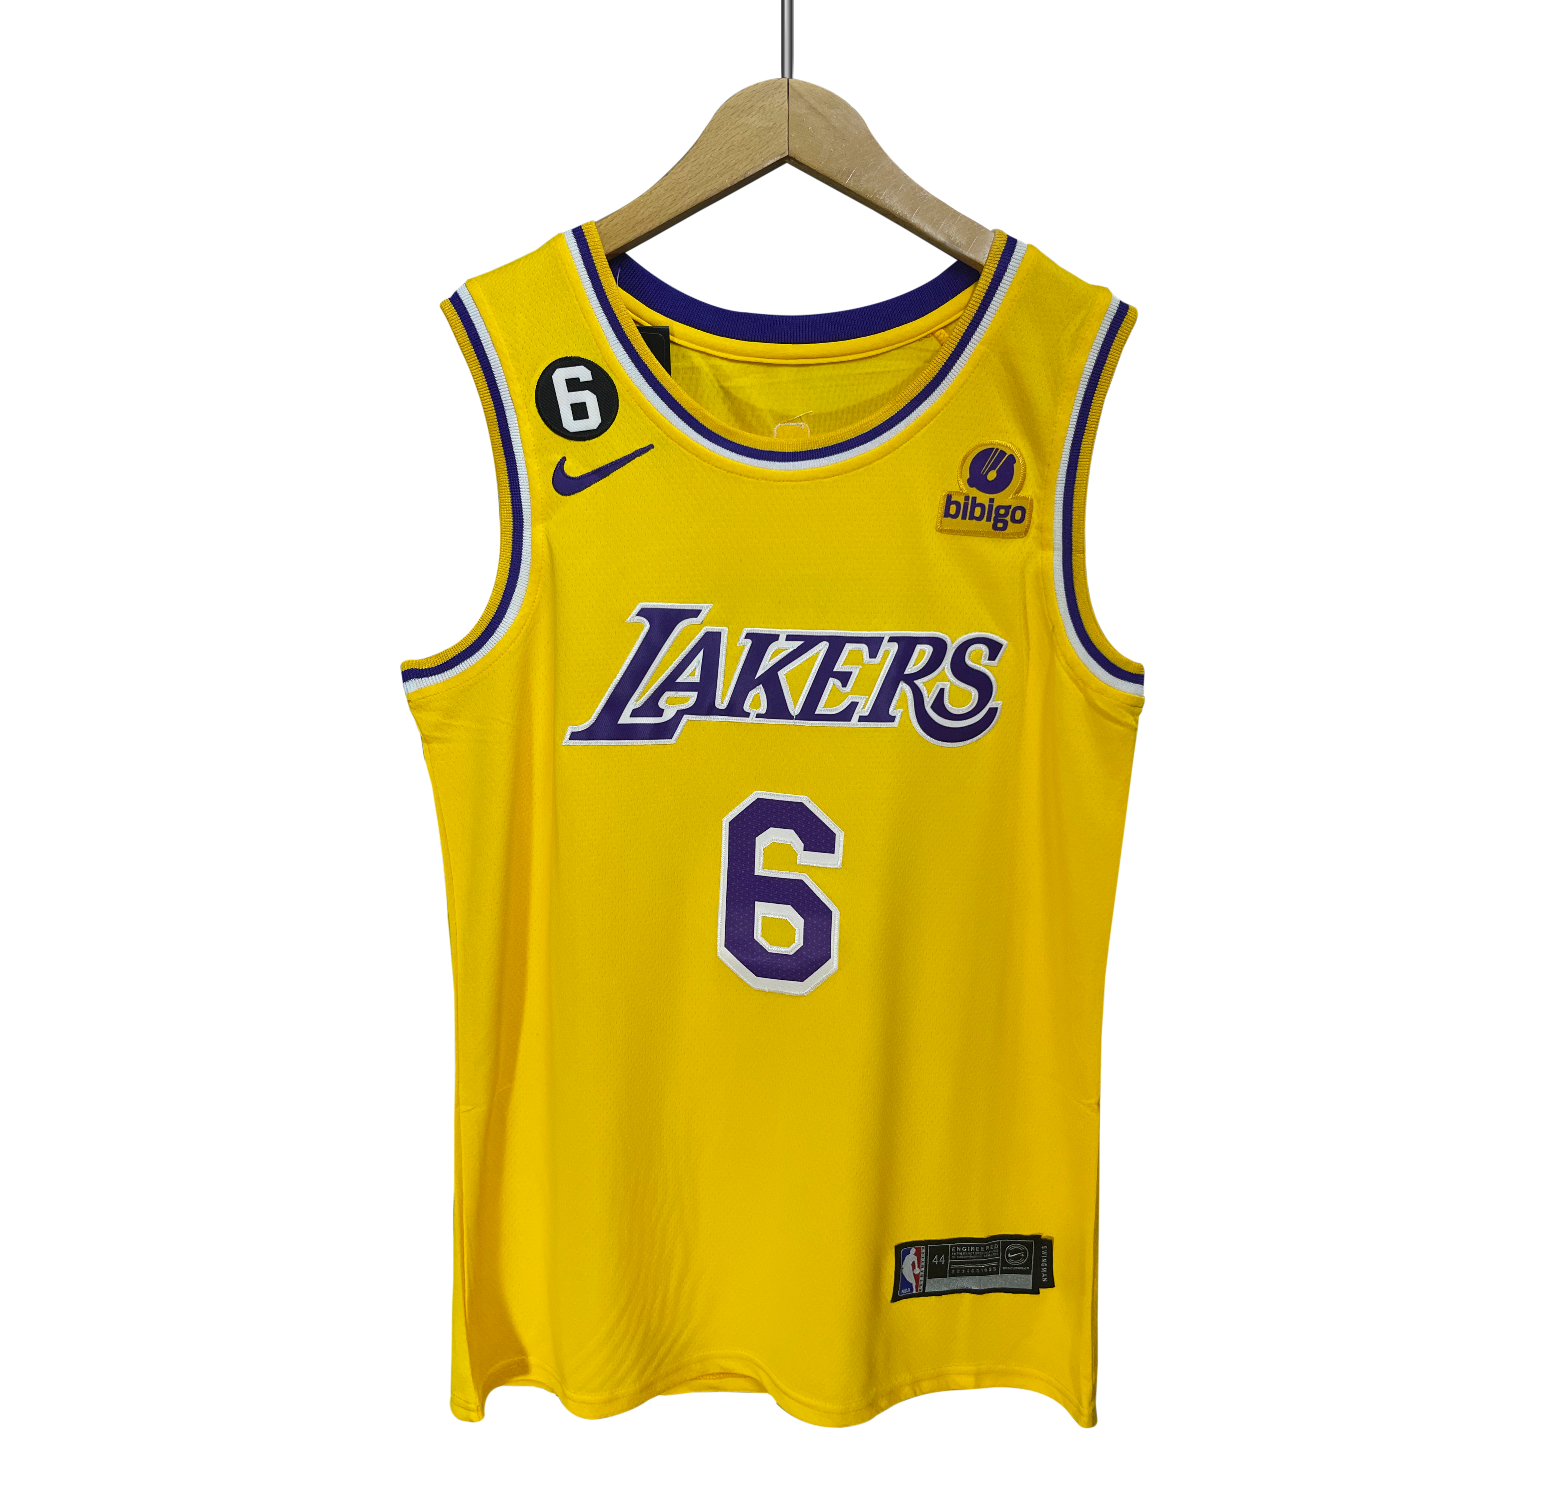 <p><strong>LAKERS JERSEY</strong></p><p><span style="color: #969696">BASKETBALL</span></p>